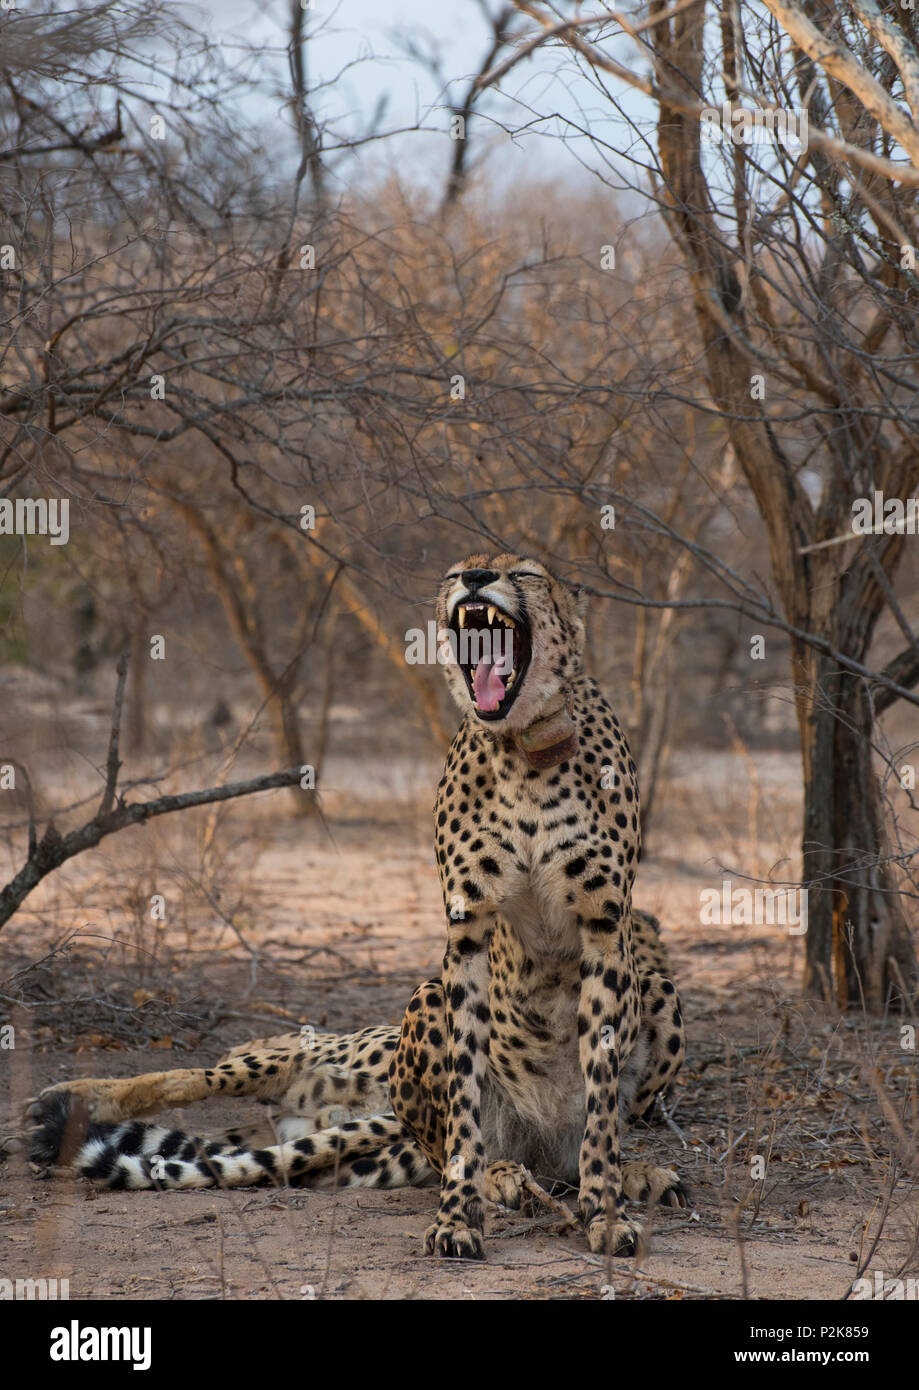 Wild Cheetah Photographed on Safari in South Africa Stock Photo